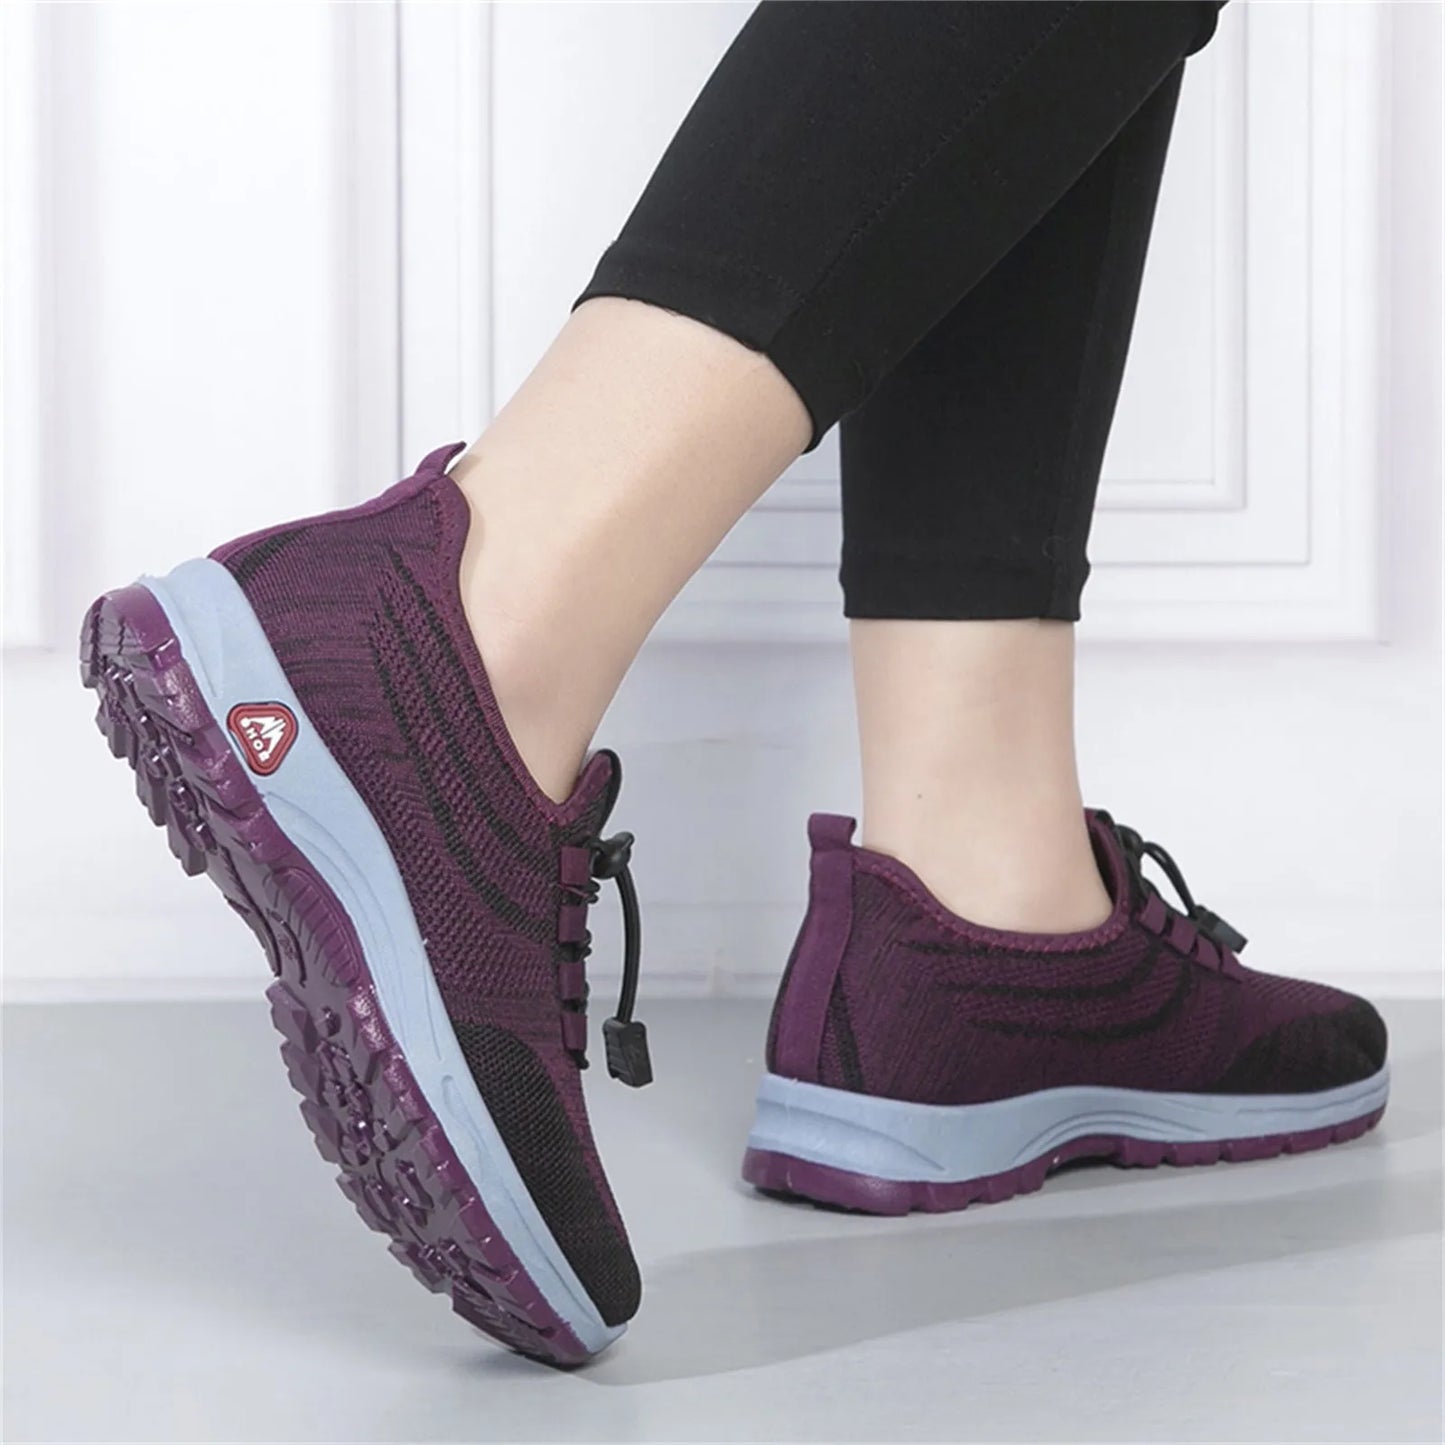 Tennis Shoes For Women Flat Bottom Non Slip Fly Woven Mesh Breathable/Casual Sneakers Woman Platform Sneakers